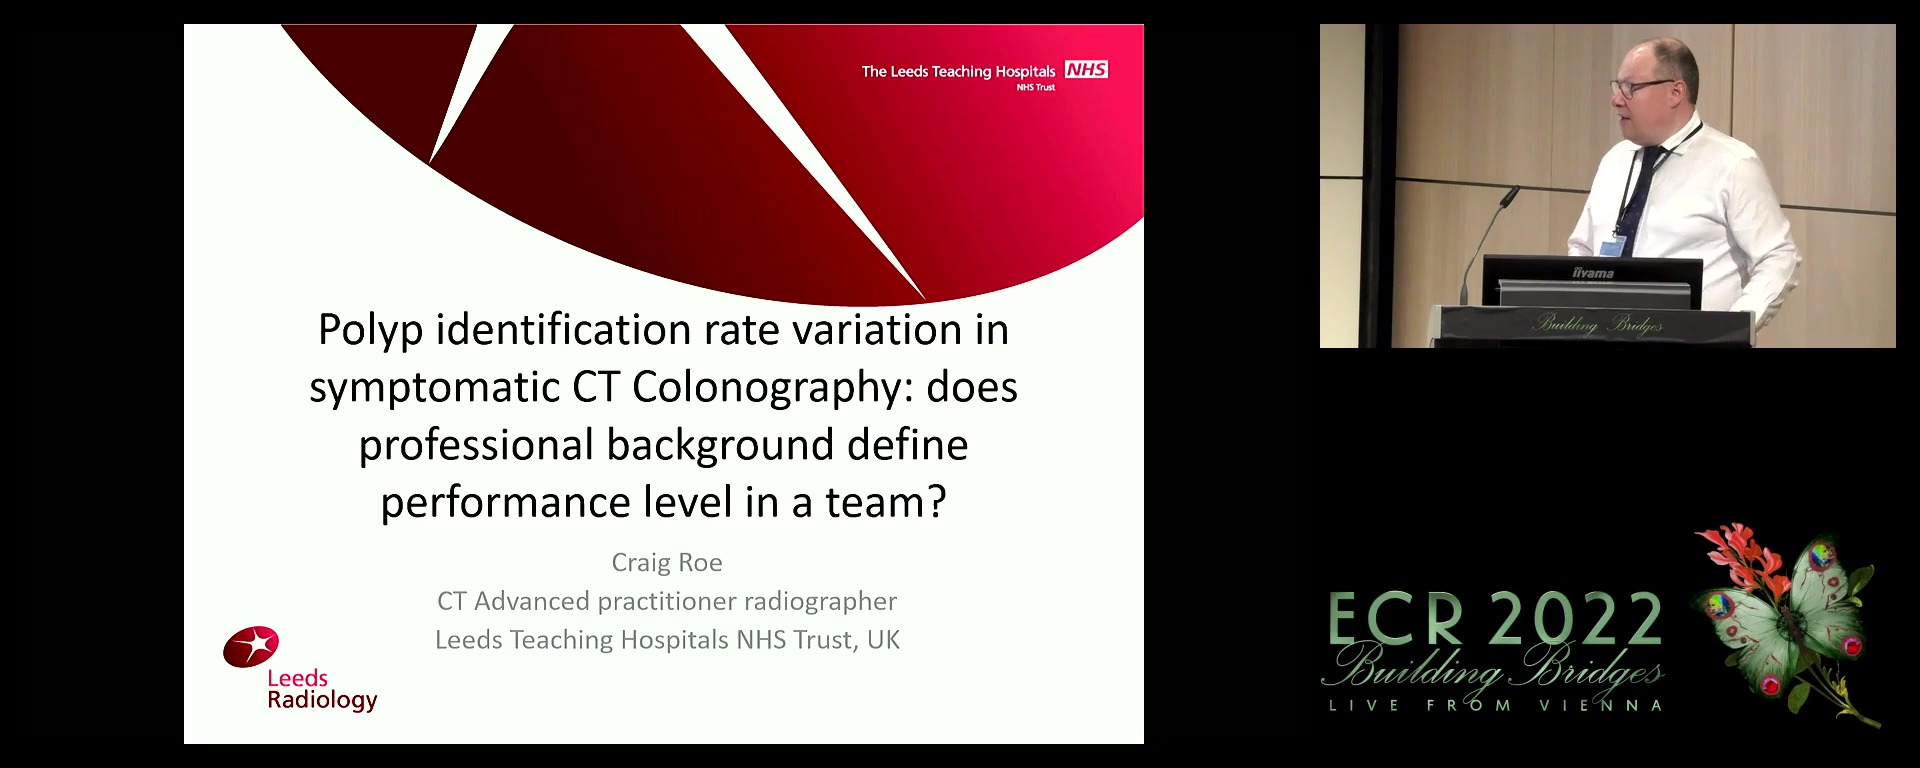 Polyp identification rate variation in symptomatic CT colonography: does professional background define performance level in a team? - Craig Roe, Leeds / UK